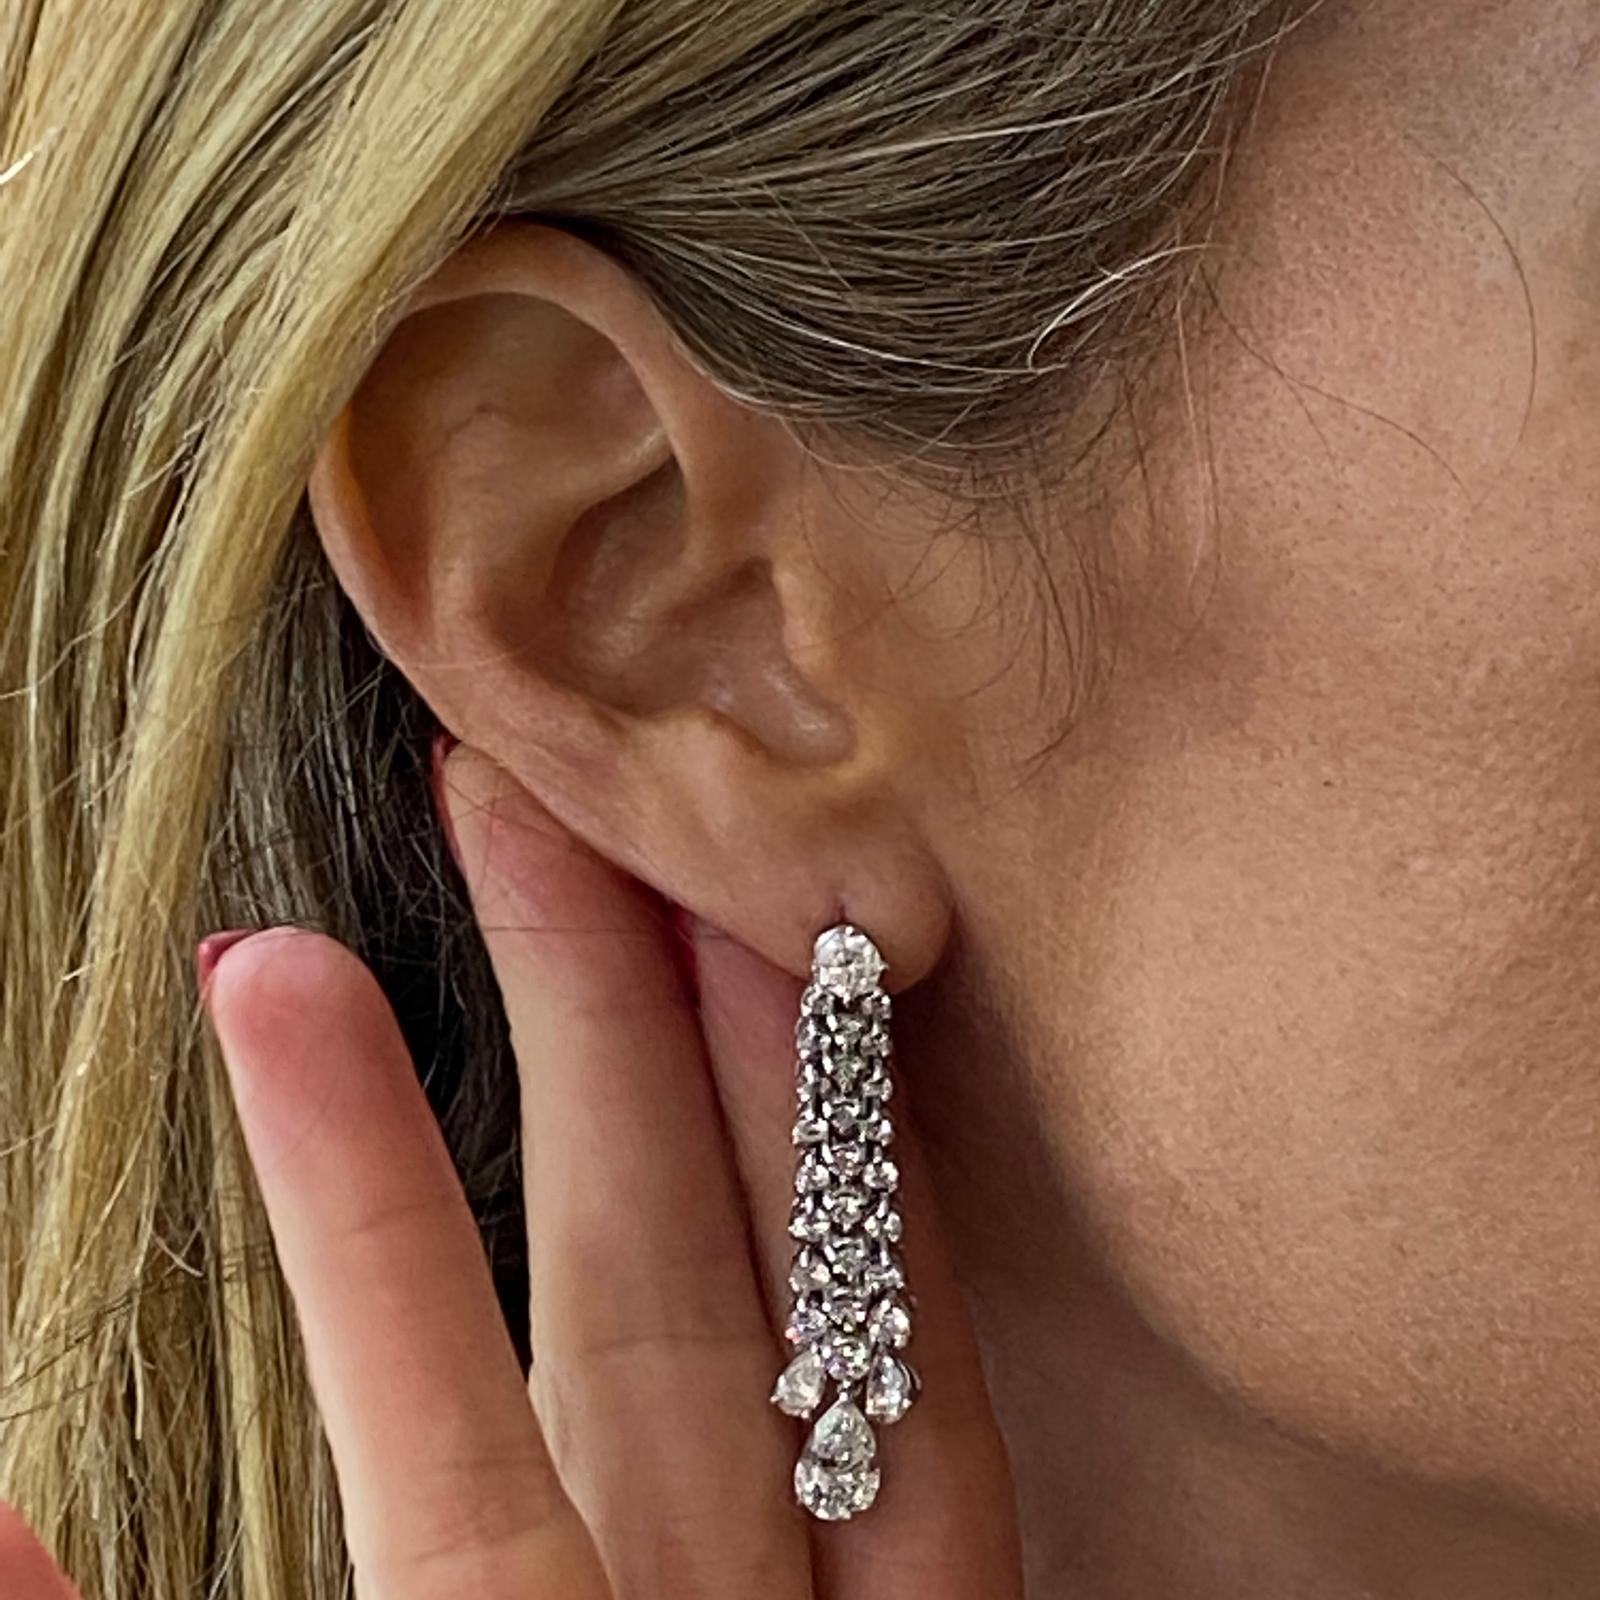 Stunning diamond drop earrings circa 1970's. The earrings feature two pear shape diamond drops that are approximately 2.00 carat total weight. The dangle earrings feature another 4.17 carats of pear and round brilliant cut diamonds. The diamonds are